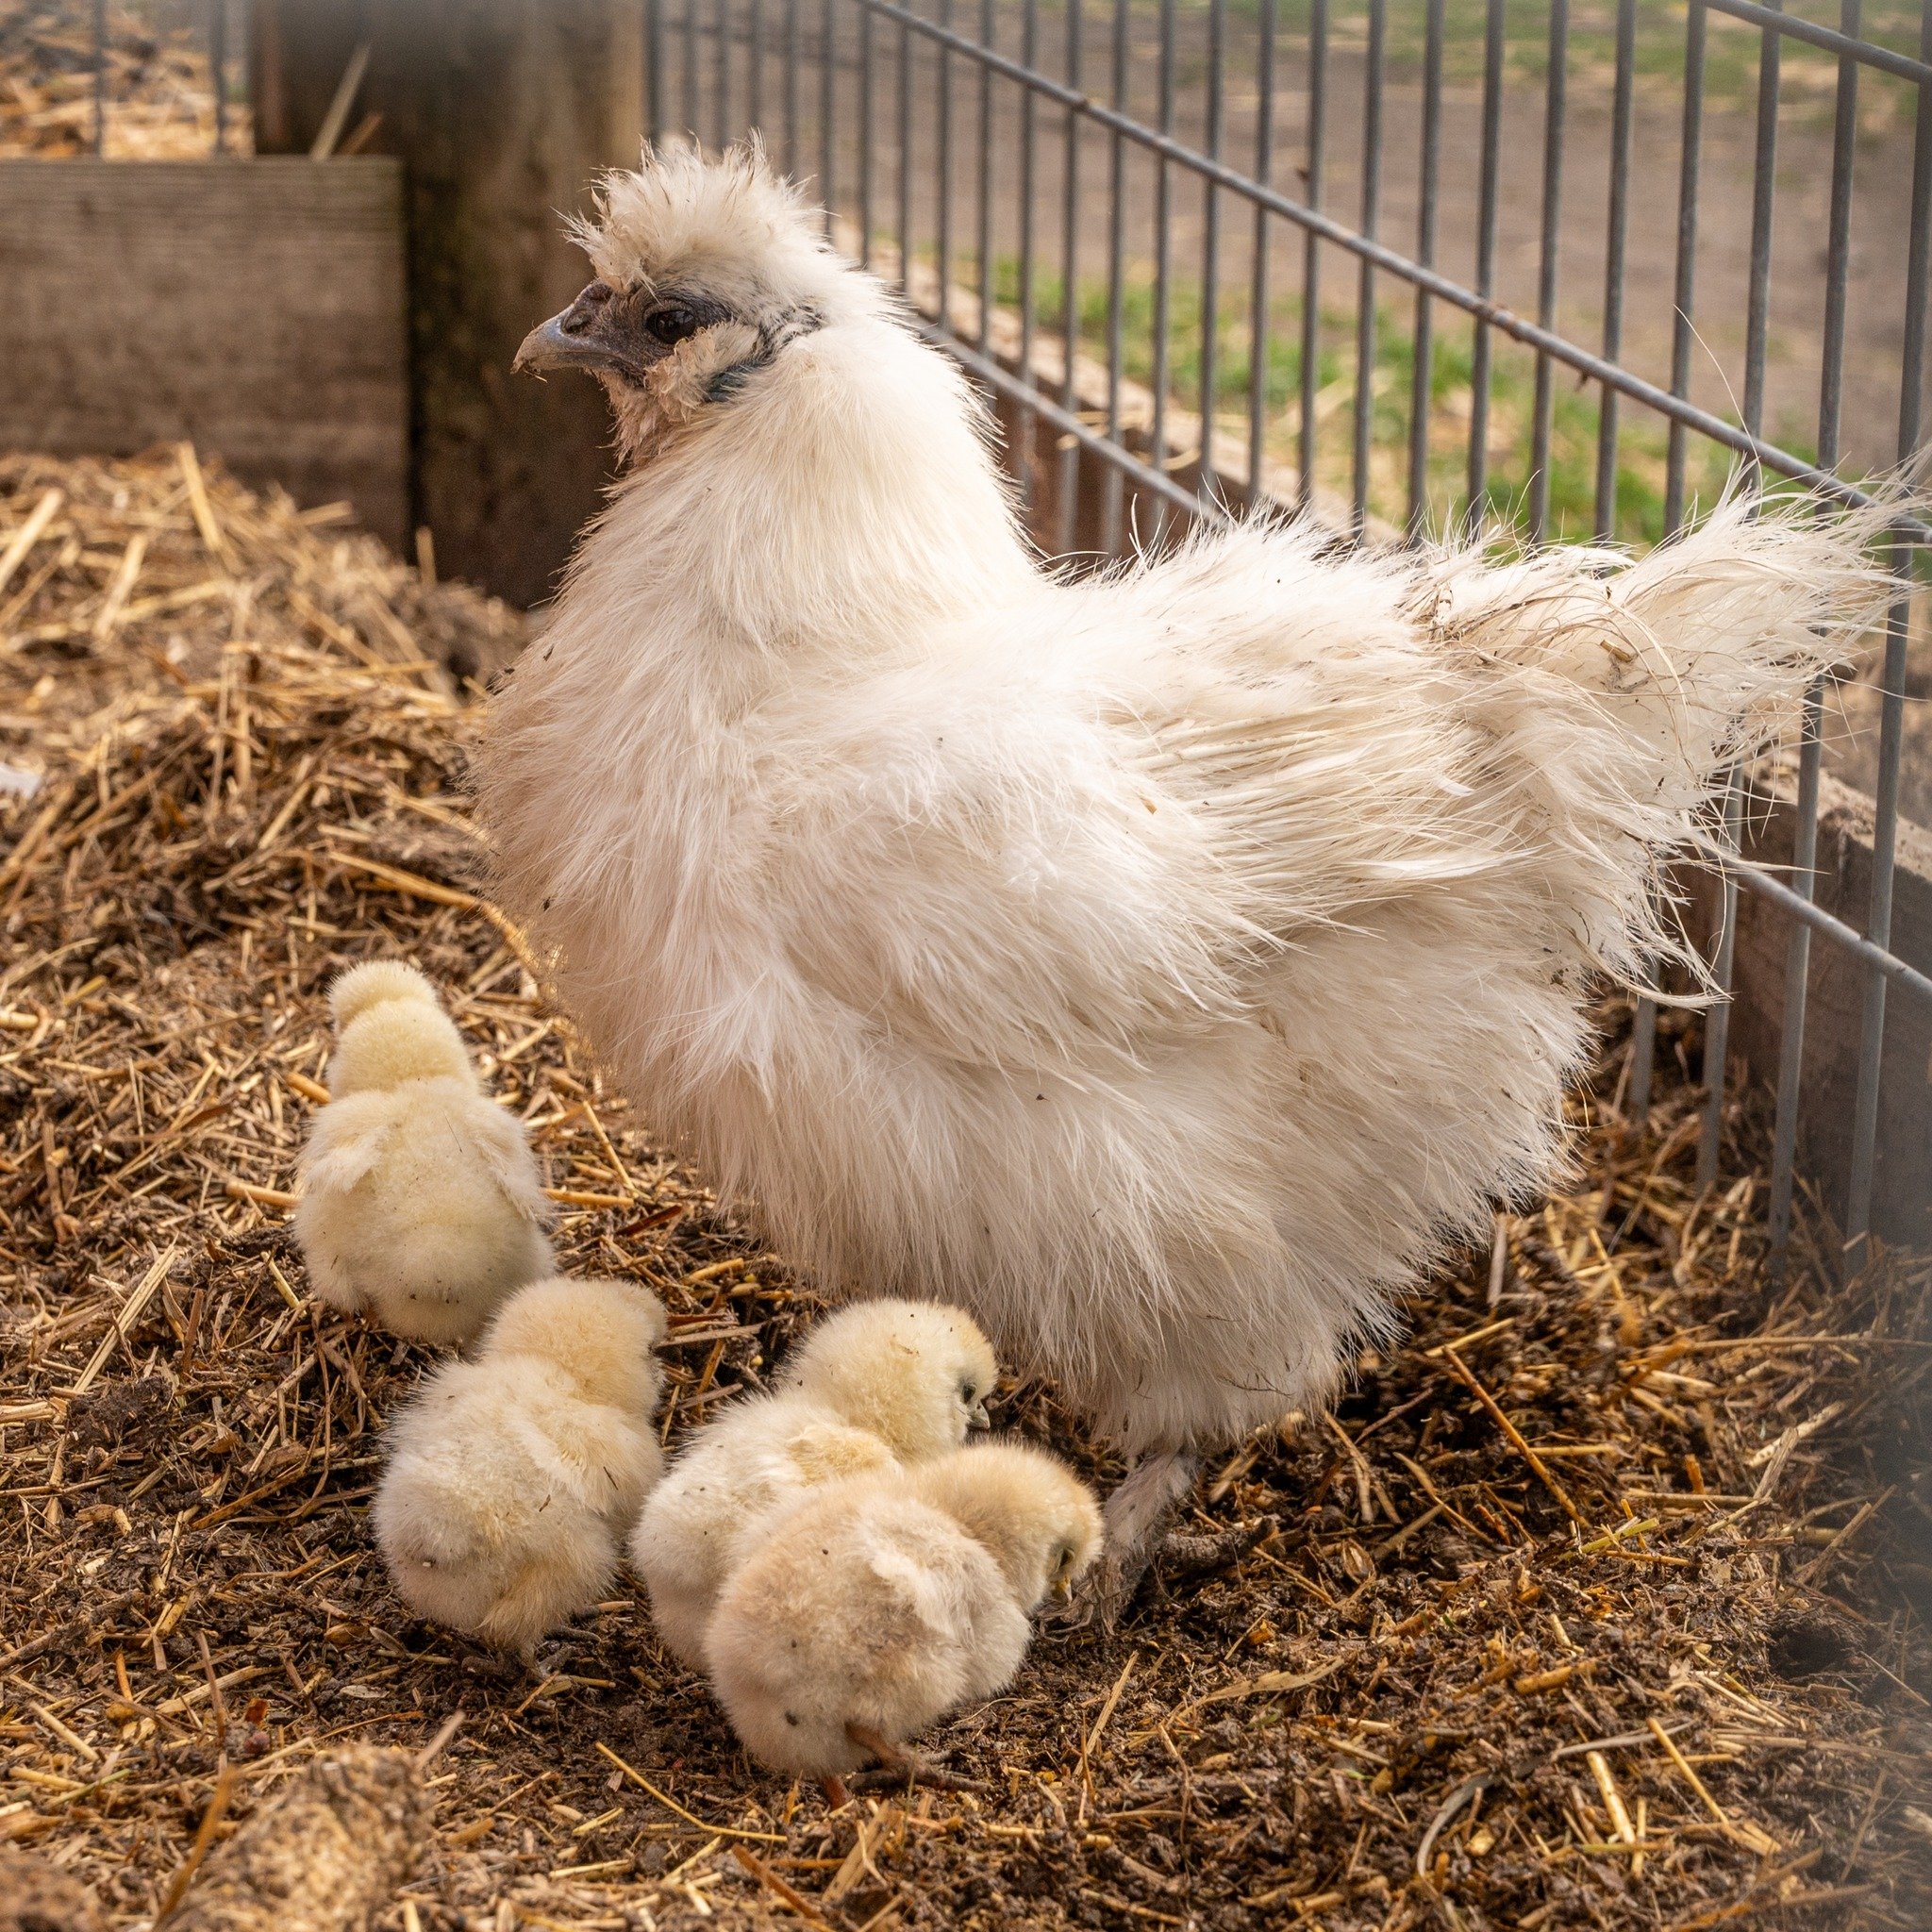 🐣 Exciting news! We've got adorable baby Silkie chicks in the kids' corral area!
Swing by and meet our newest fluffy friends. They're sure to melt your heart! 🥰